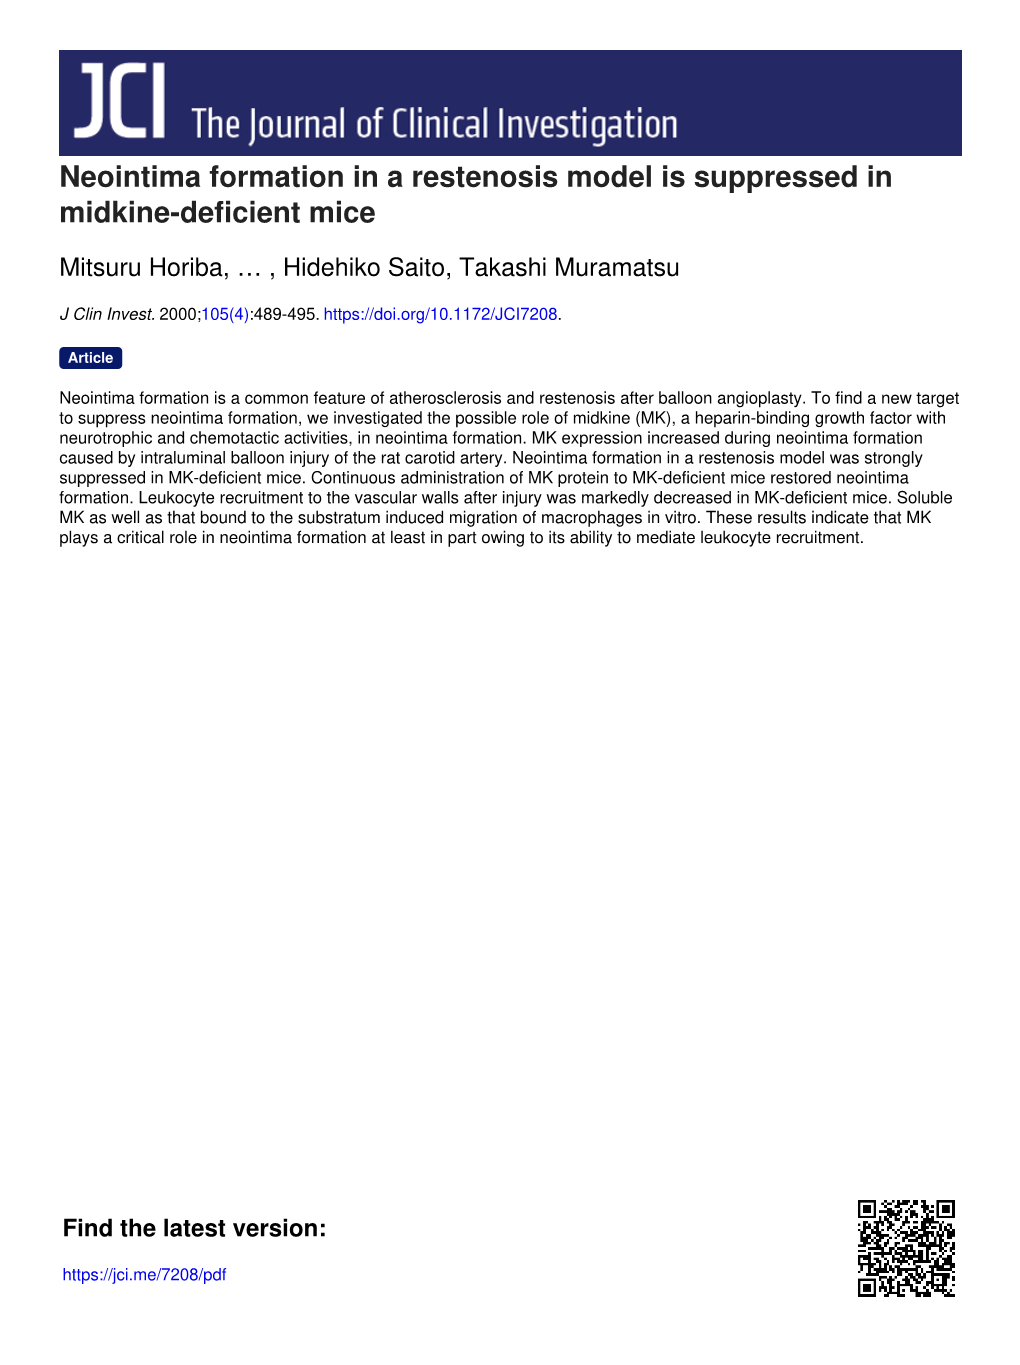 Neointima Formation in a Restenosis Model Is Suppressed in Midkine-Deficient Mice